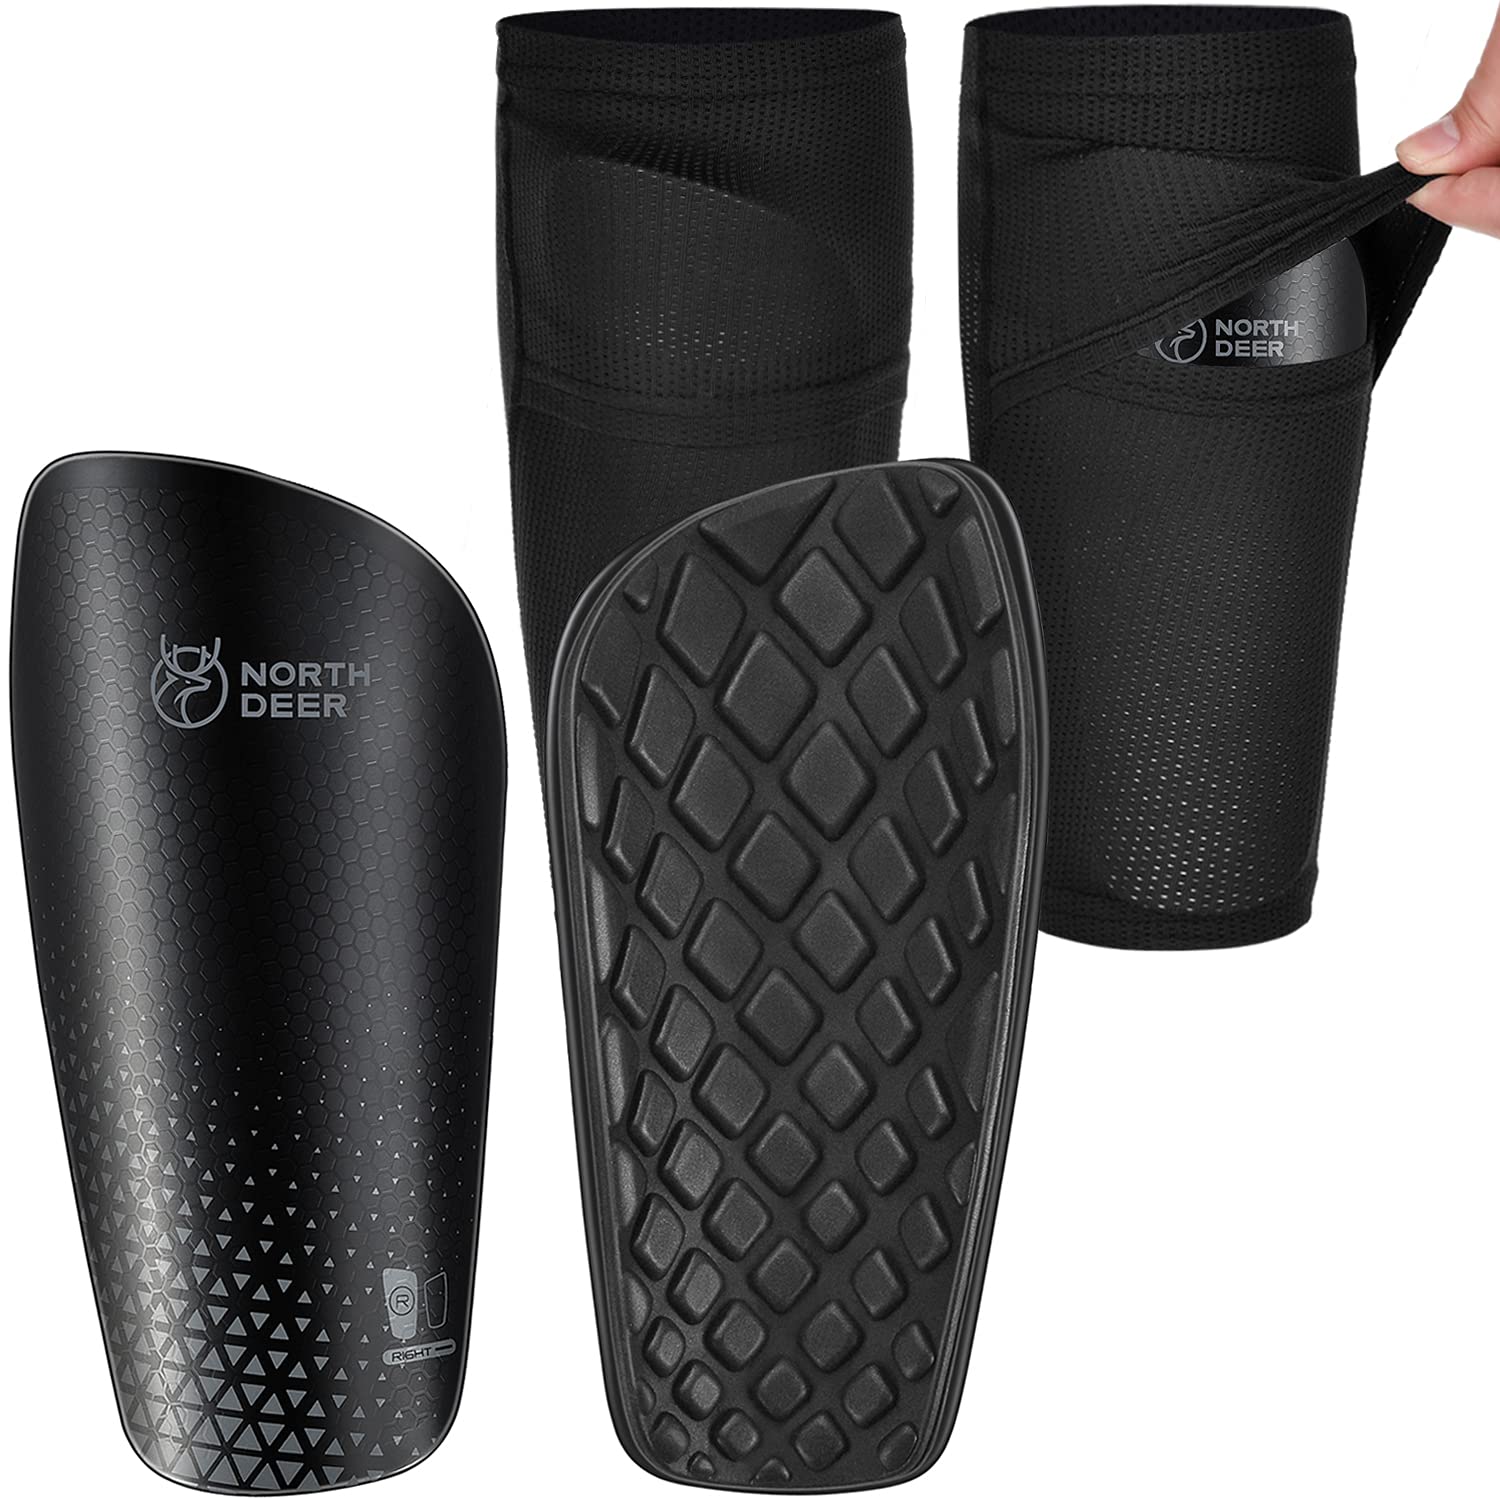 Northdeer Soccer Shin Guards for Men incl. Sleeves with Optimized Insert Pocket - Protective Soccer Equipment for Kids Adults (Black L)